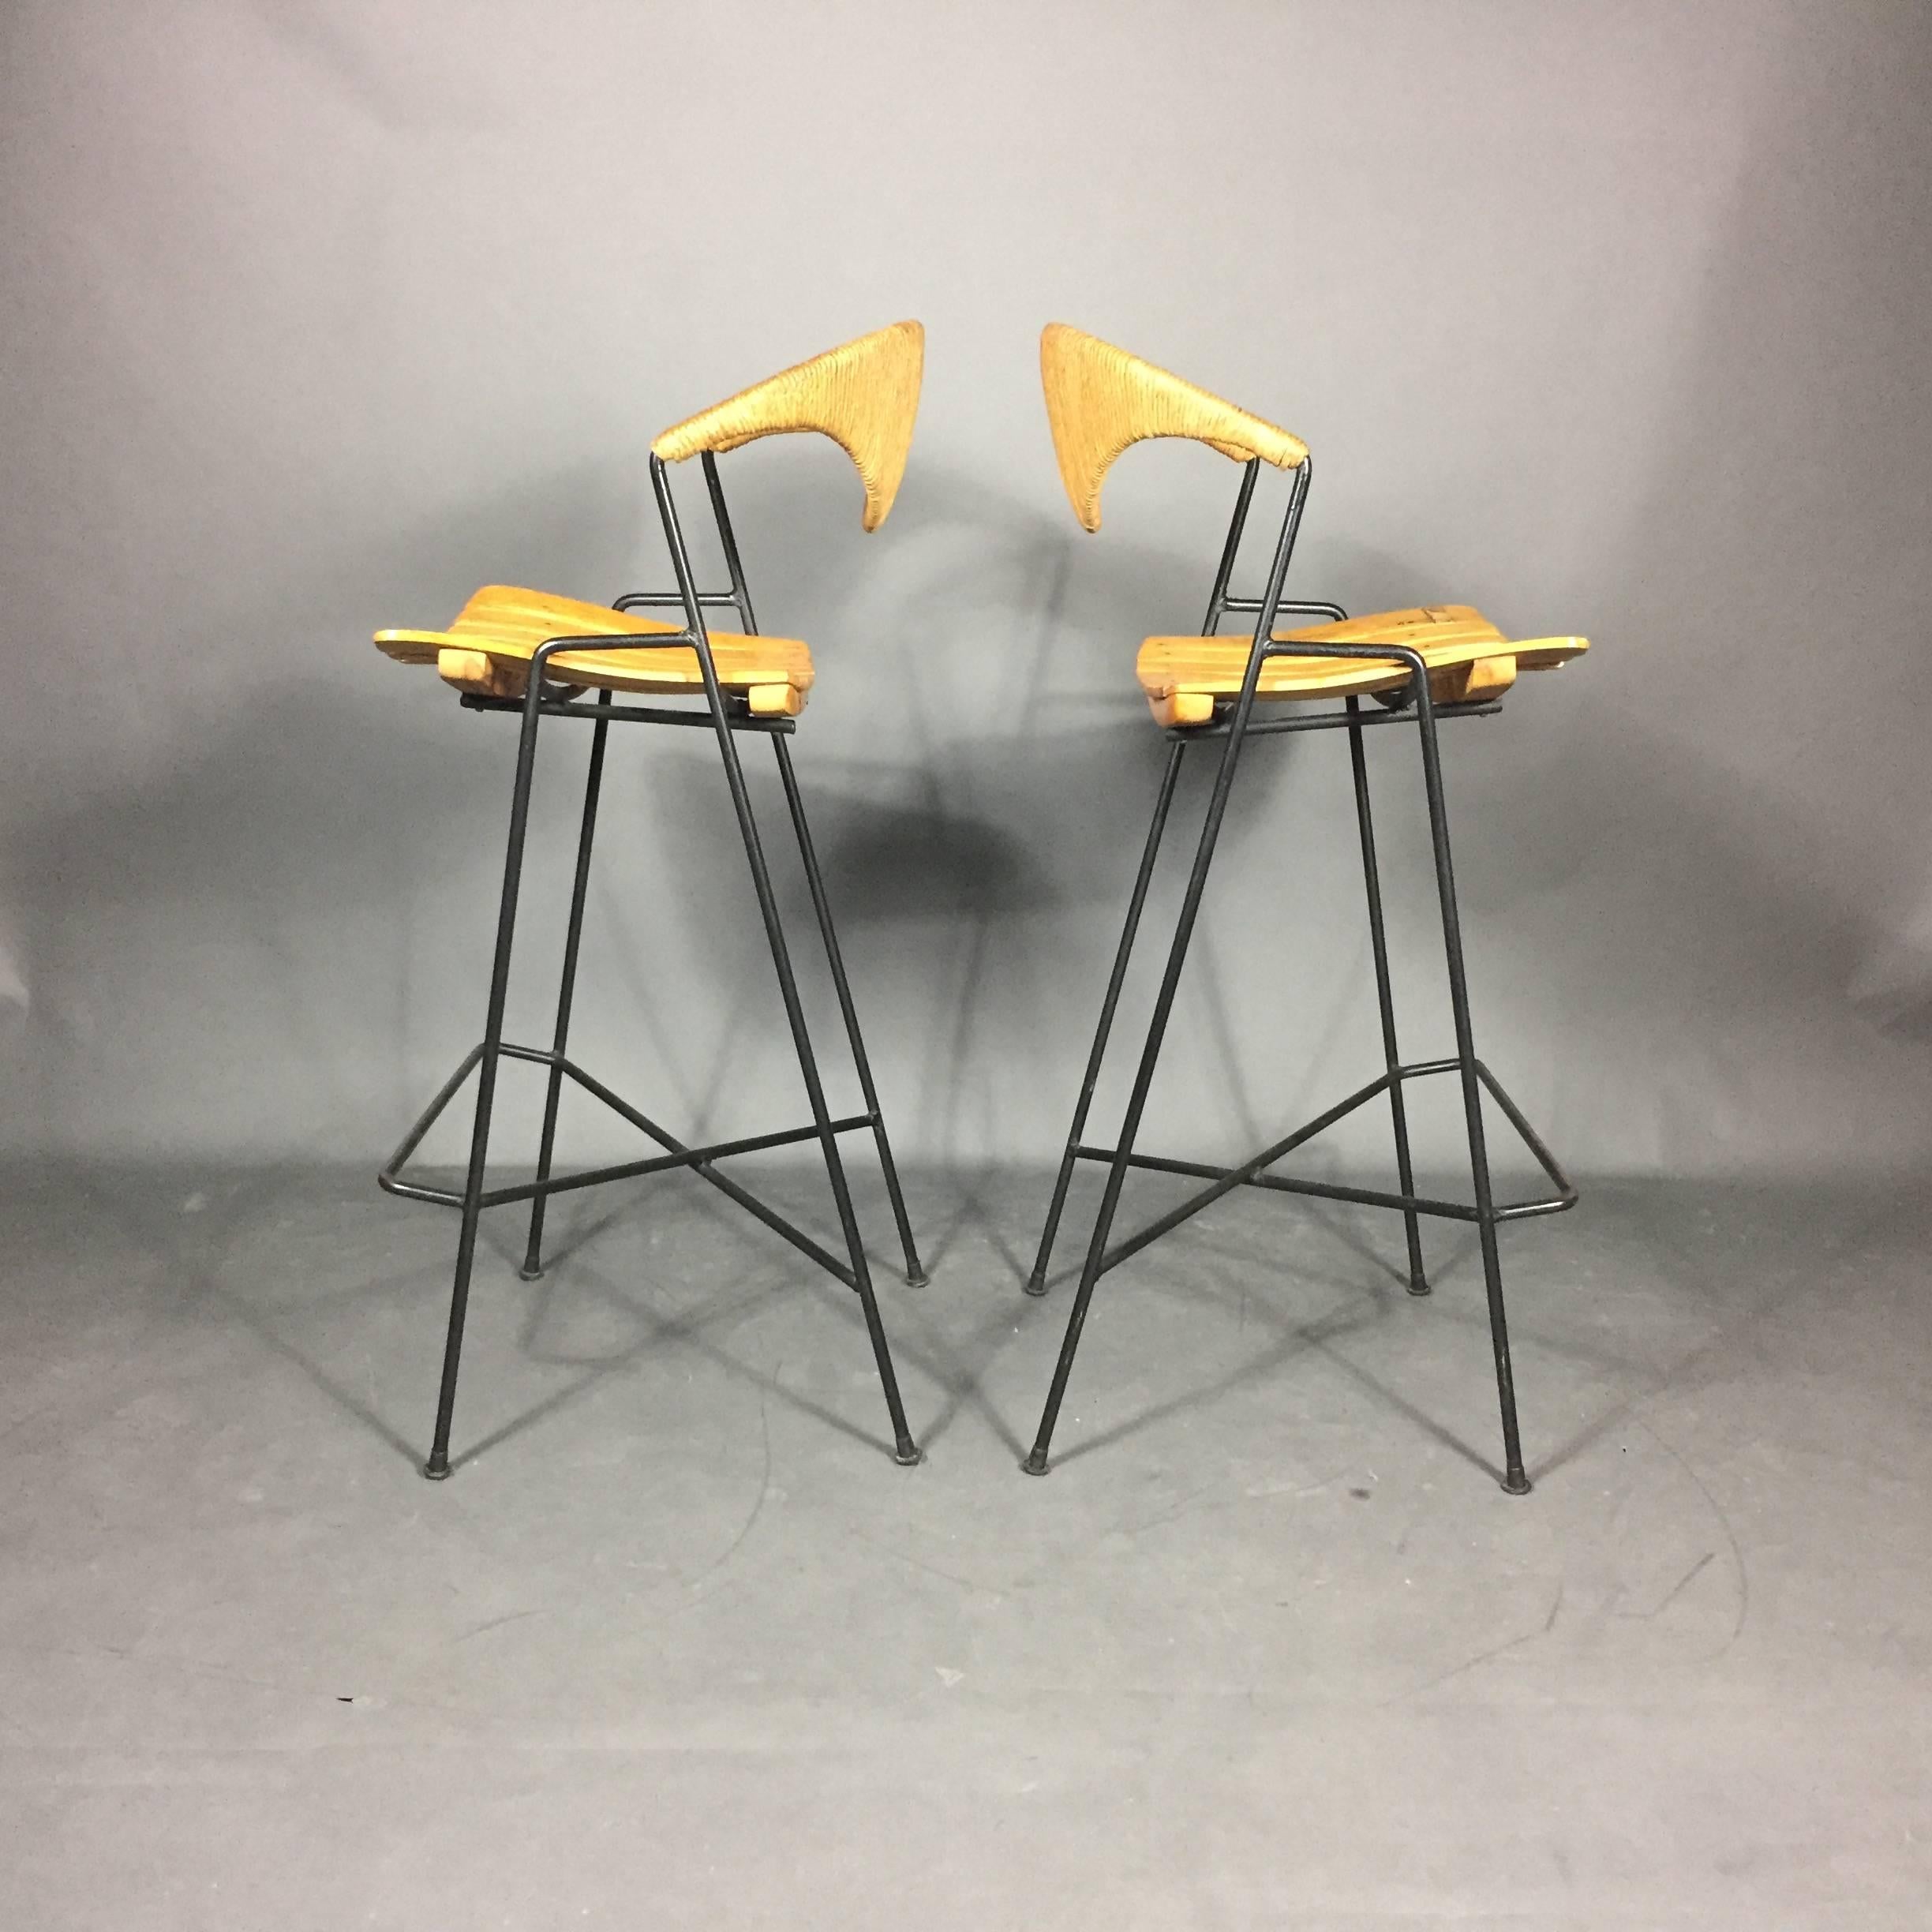 Another Classic American Mid-Century design - the always gorgeous bar stool by Arthur Umanoff for Raymor. All original black lacquered iron frame and intact feet with birch seating and chicly curved backs in rush. Evident repair to one slat of one